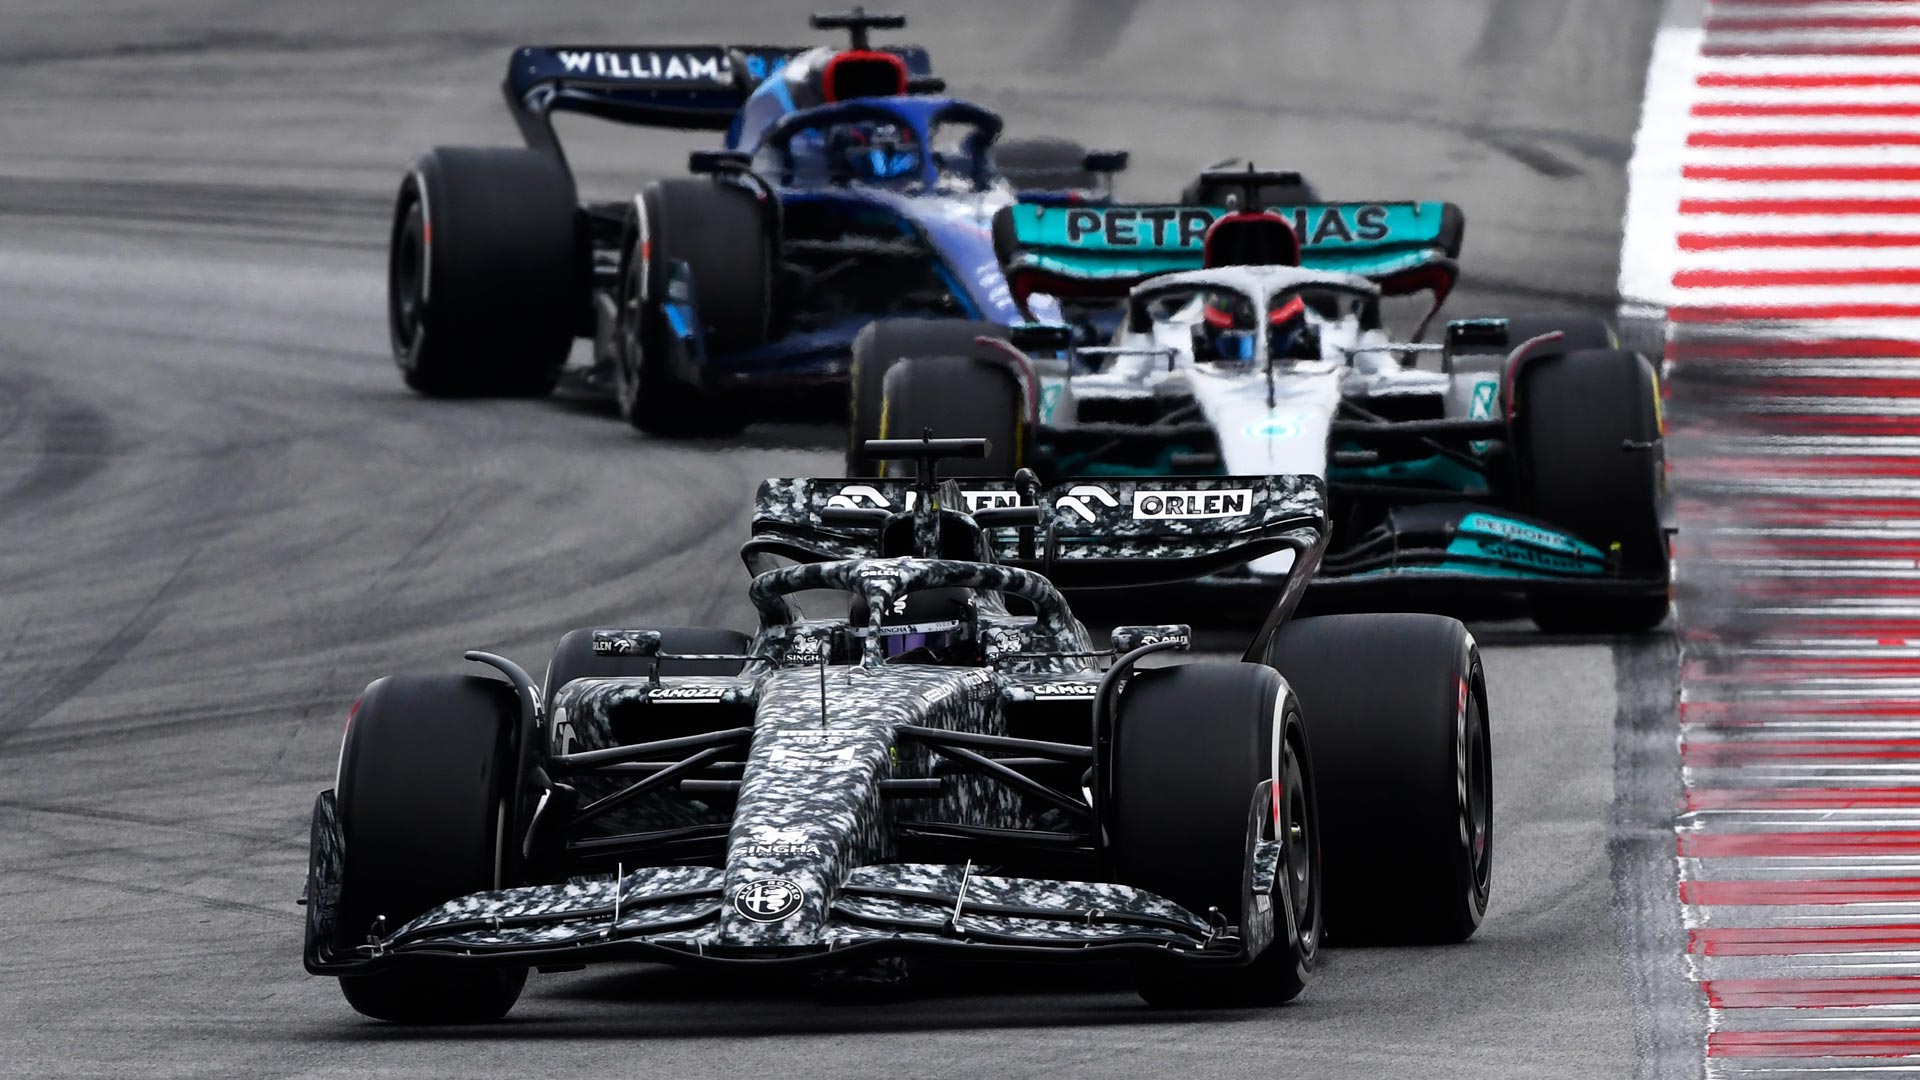 F1 Barcelona Pre Season Running 2022: How All 10 Teams Fared After Showing Off Their 2022 Cars In Barcelona Pre Season Running. Formula 1®